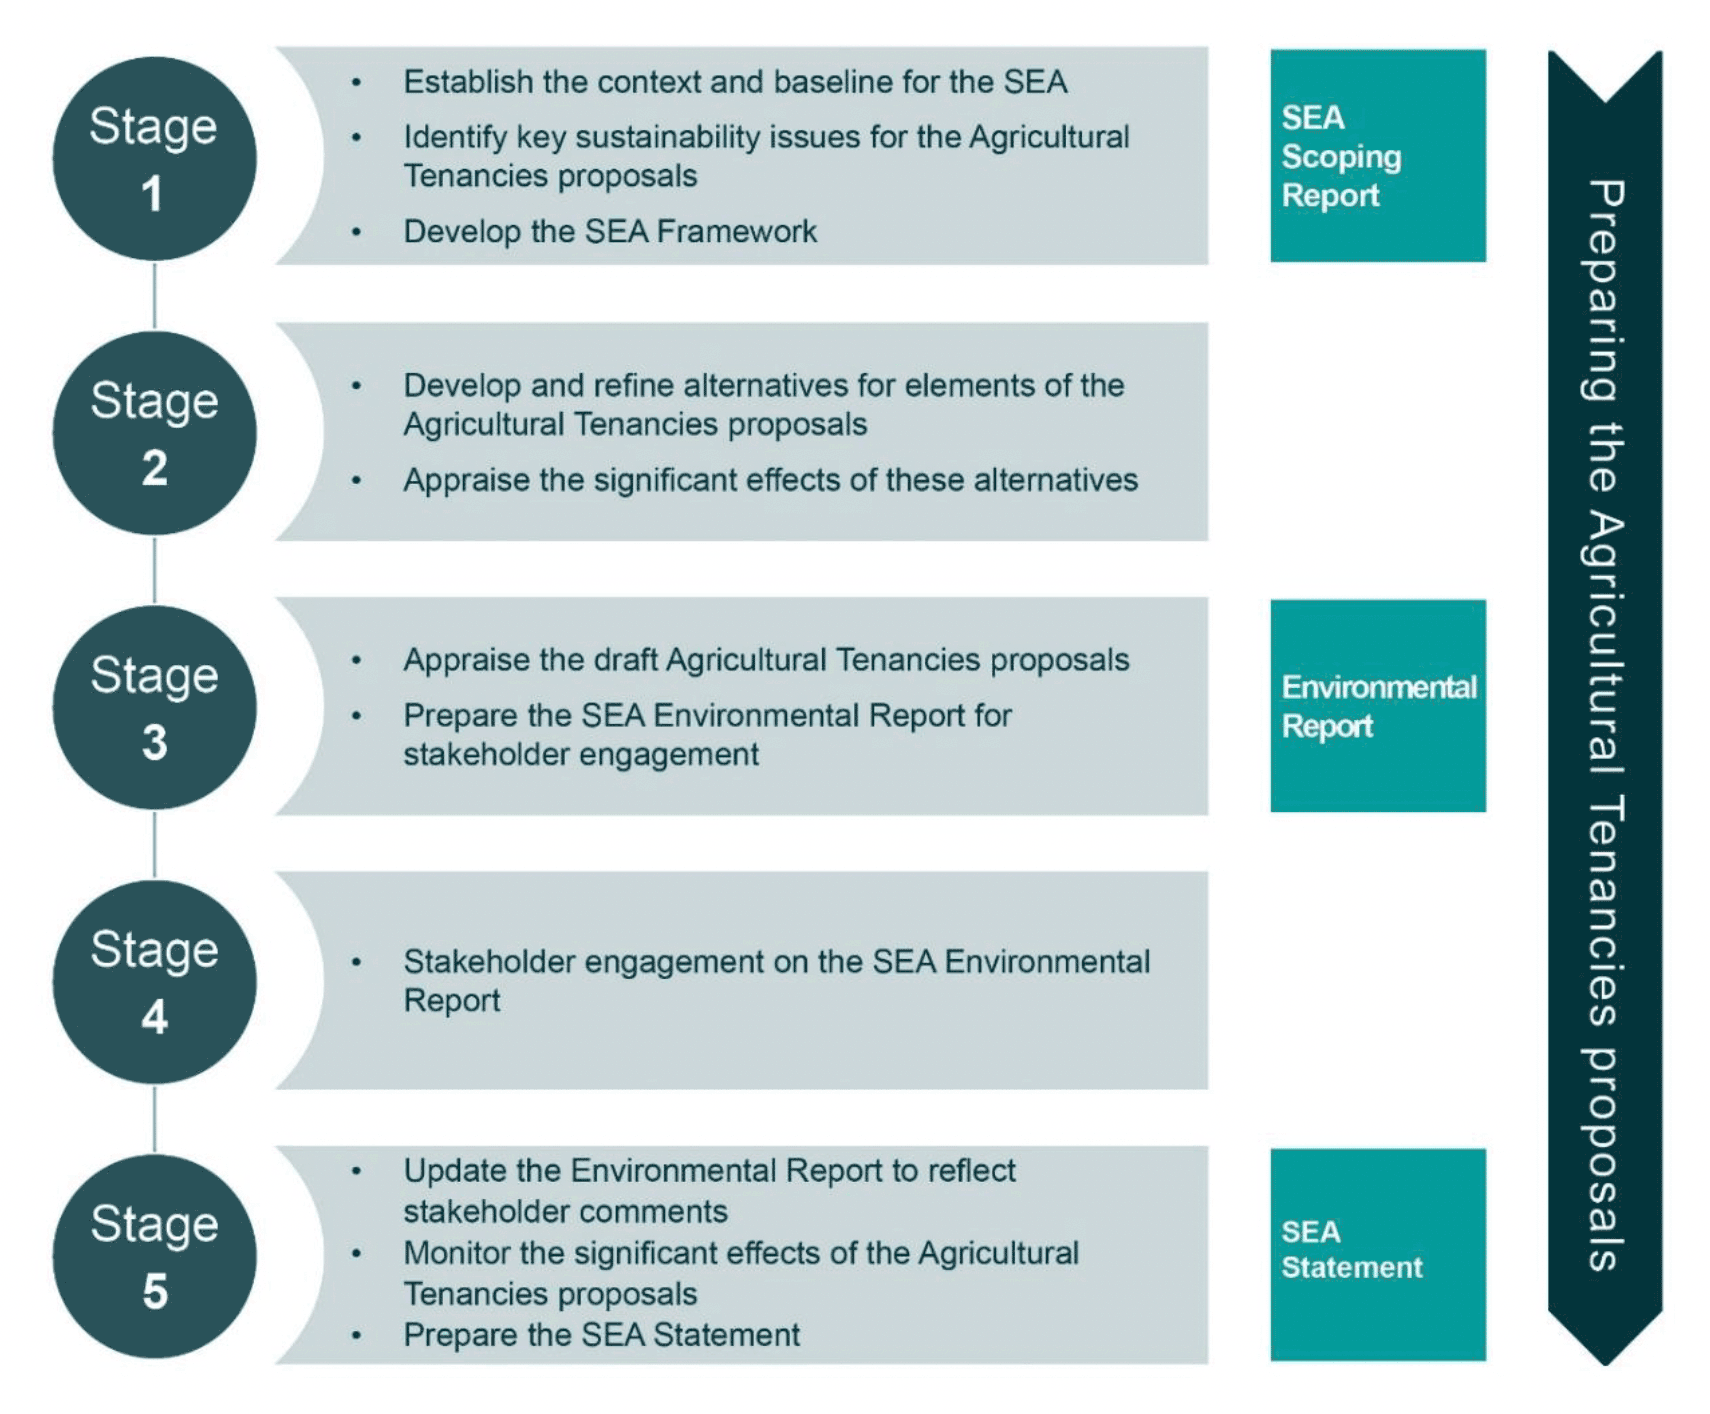 A diagram showing the five stages of the SEA process.  The SEA Scoping Report coincides with Stage 1, the Environmental Report with Stage 3, and the SEA Statement with Stage 5.